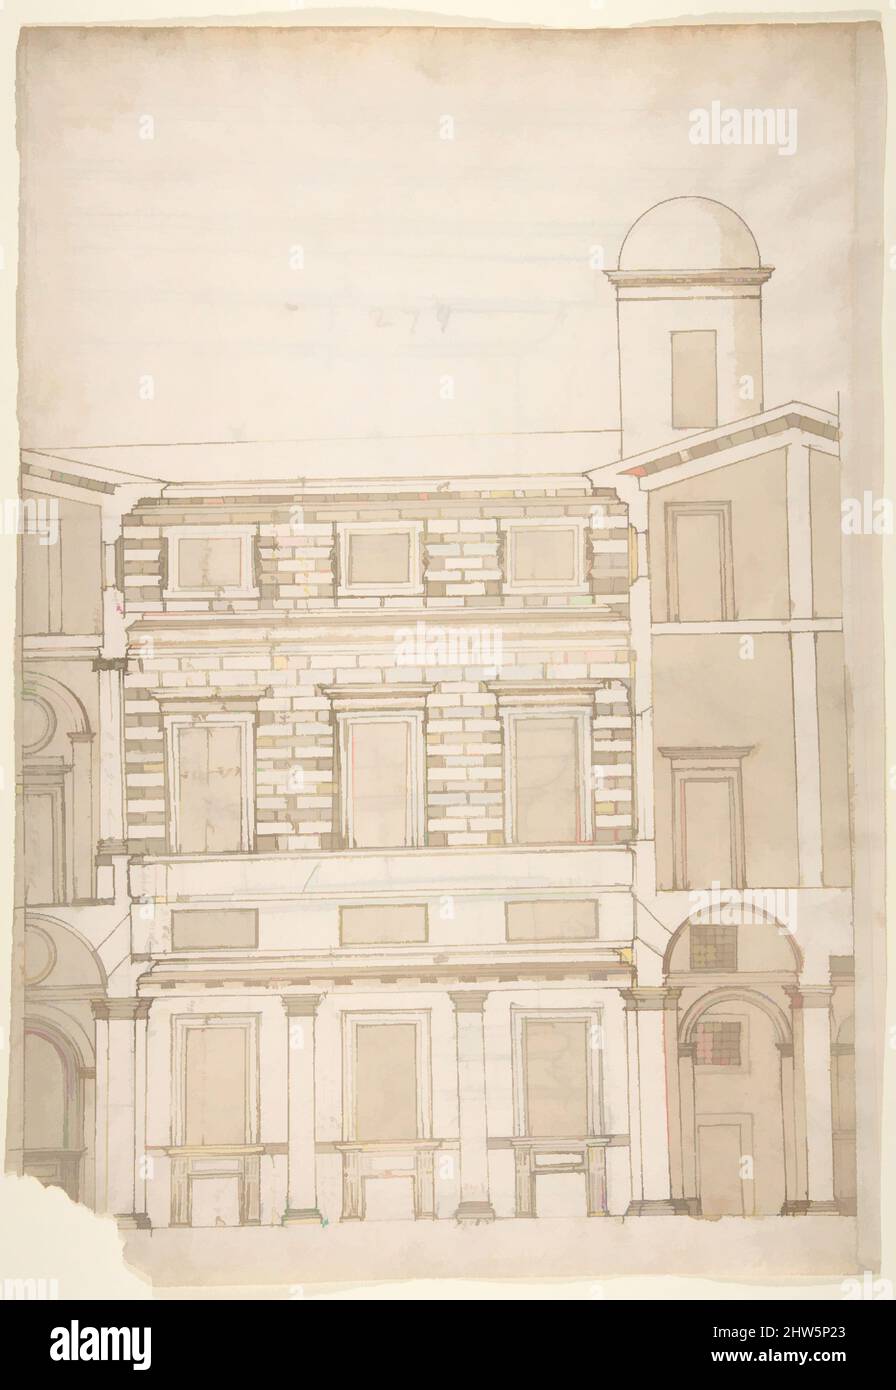 Art inspired by Palazzo Massimo alle Colonne, cortile, section (recto) Palazzo Massimo alle Colonne, first story loggia entablature, profile section and column shaft (verso), early to mid-16th century, Dark brown ink, black chalk, and incised lines, sheet: 16 1/8 x 11 1/4 in. (41 x 28., Classic works modernized by Artotop with a splash of modernity. Shapes, color and value, eye-catching visual impact on art. Emotions through freedom of artworks in a contemporary way. A timeless message pursuing a wildly creative new direction. Artists turning to the digital medium and creating the Artotop NFT Stock Photo